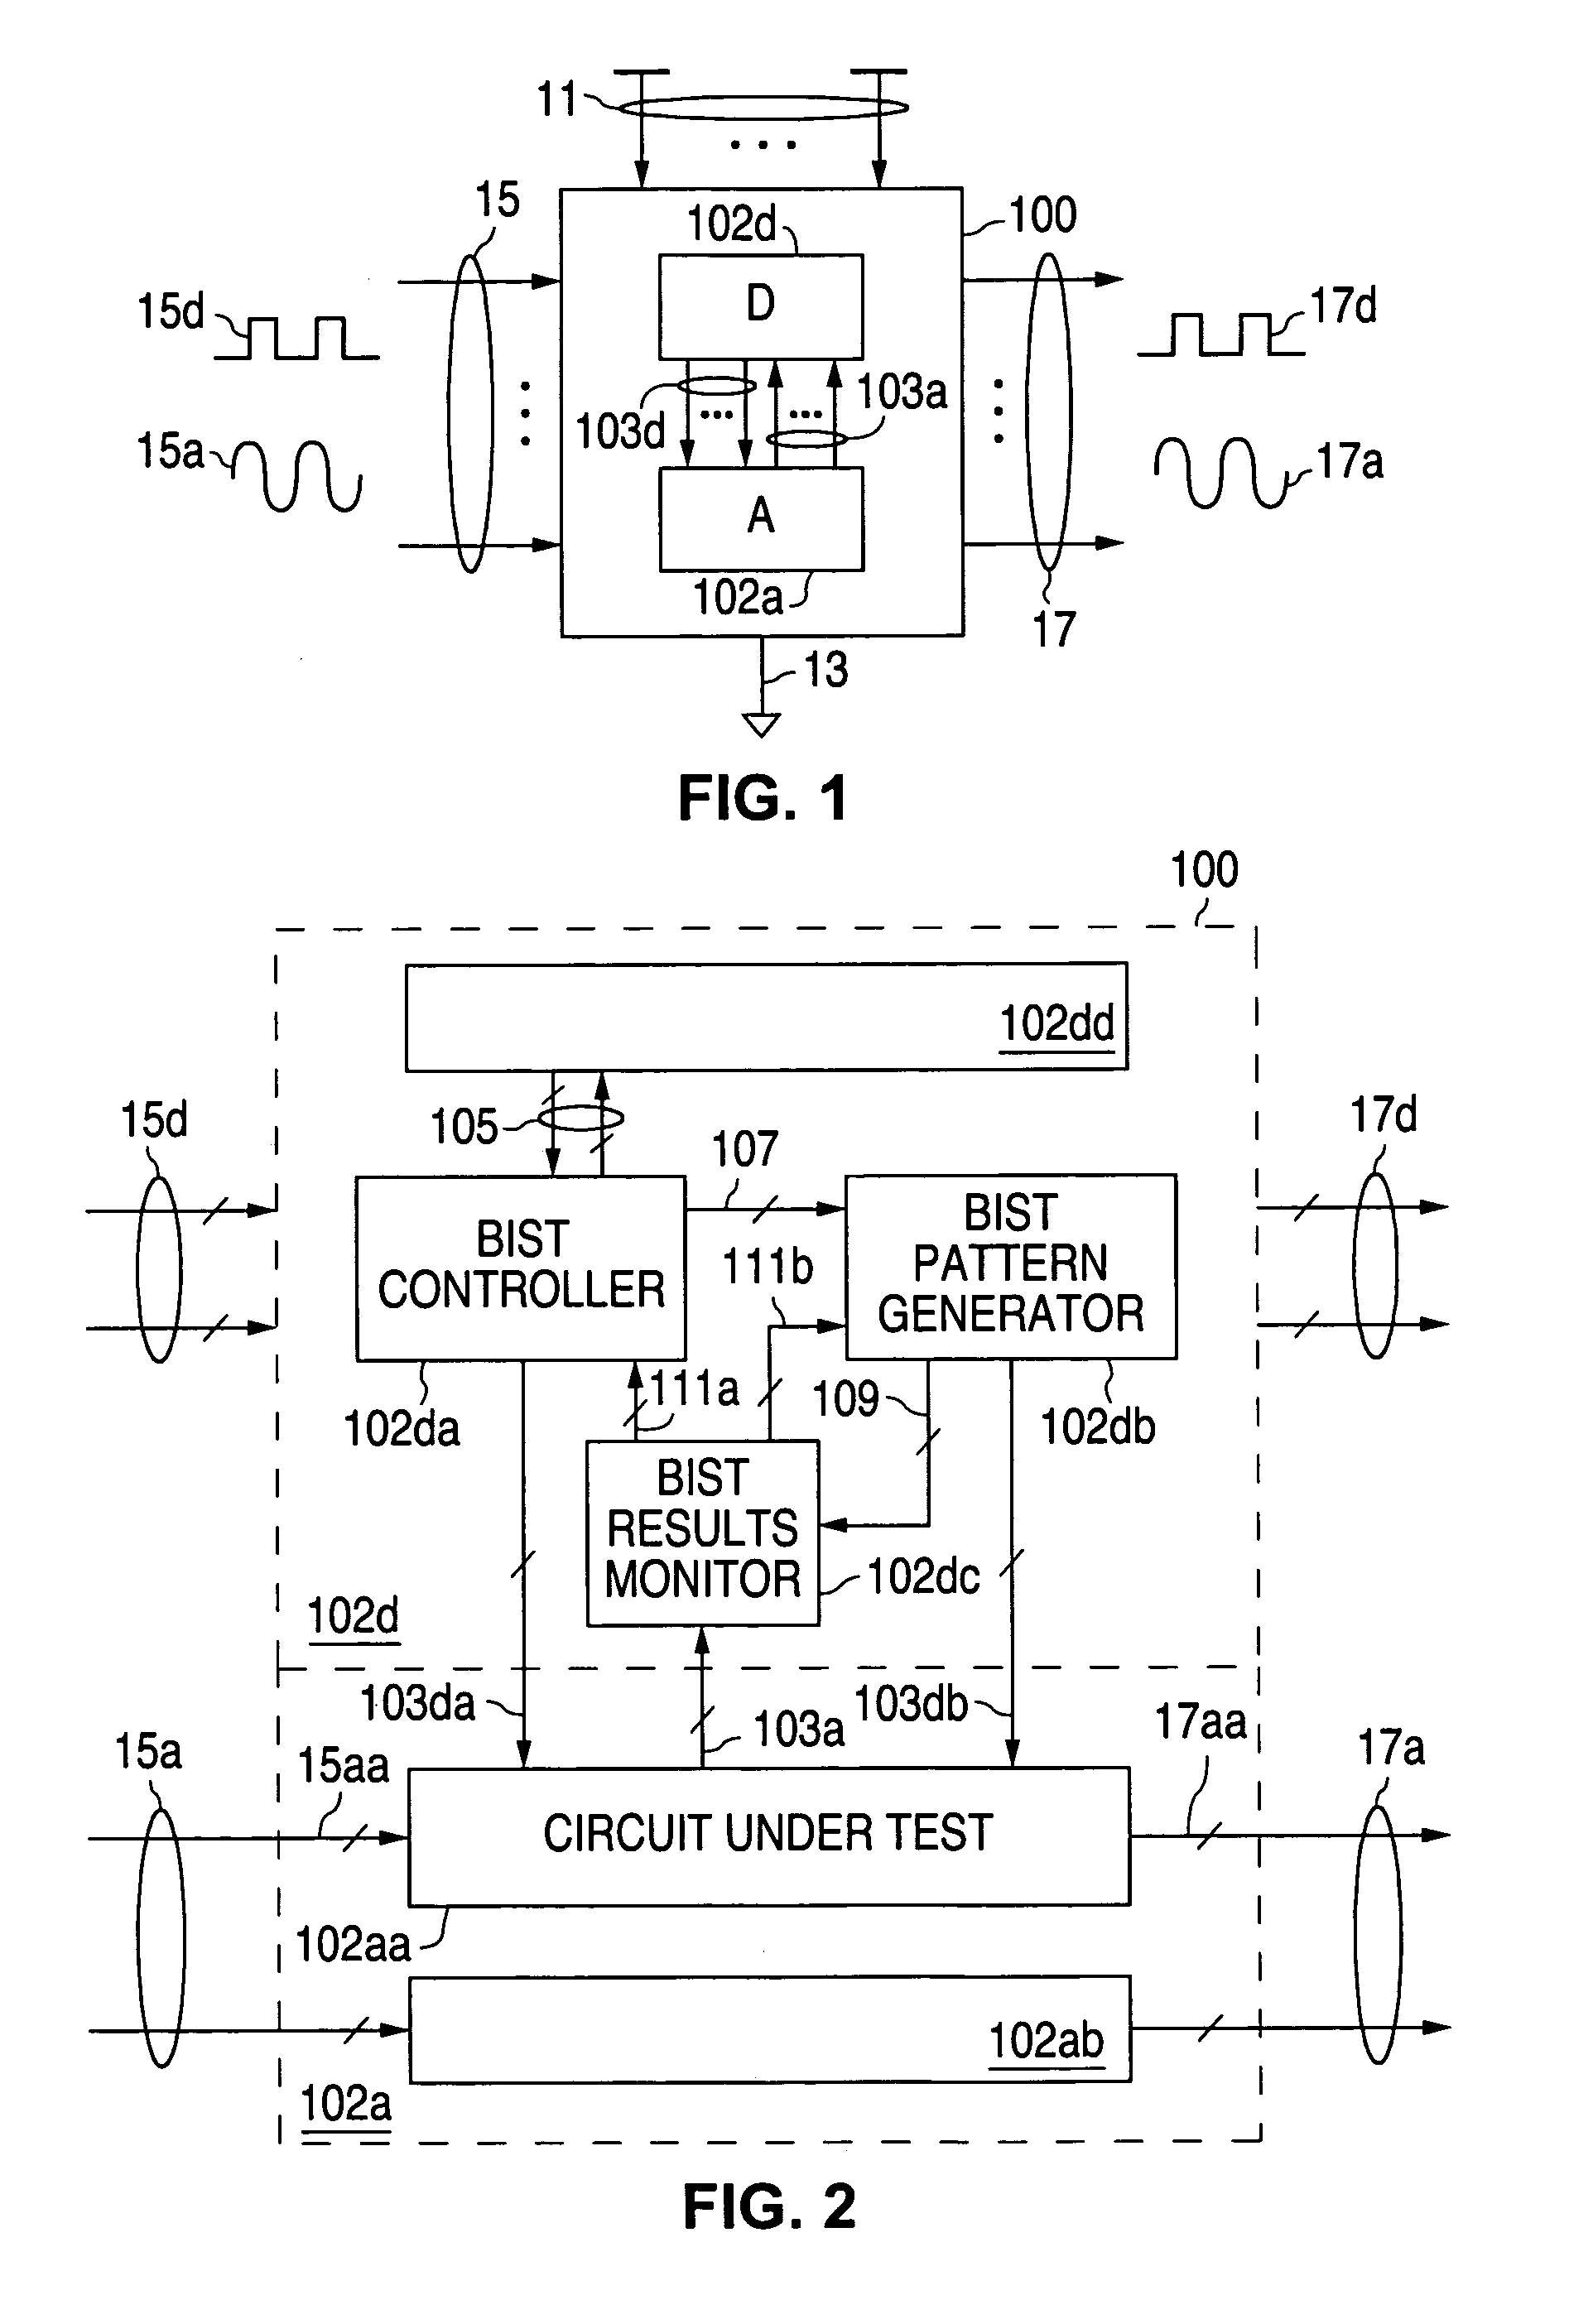 Mixed signal integrated circuits with self-test capability